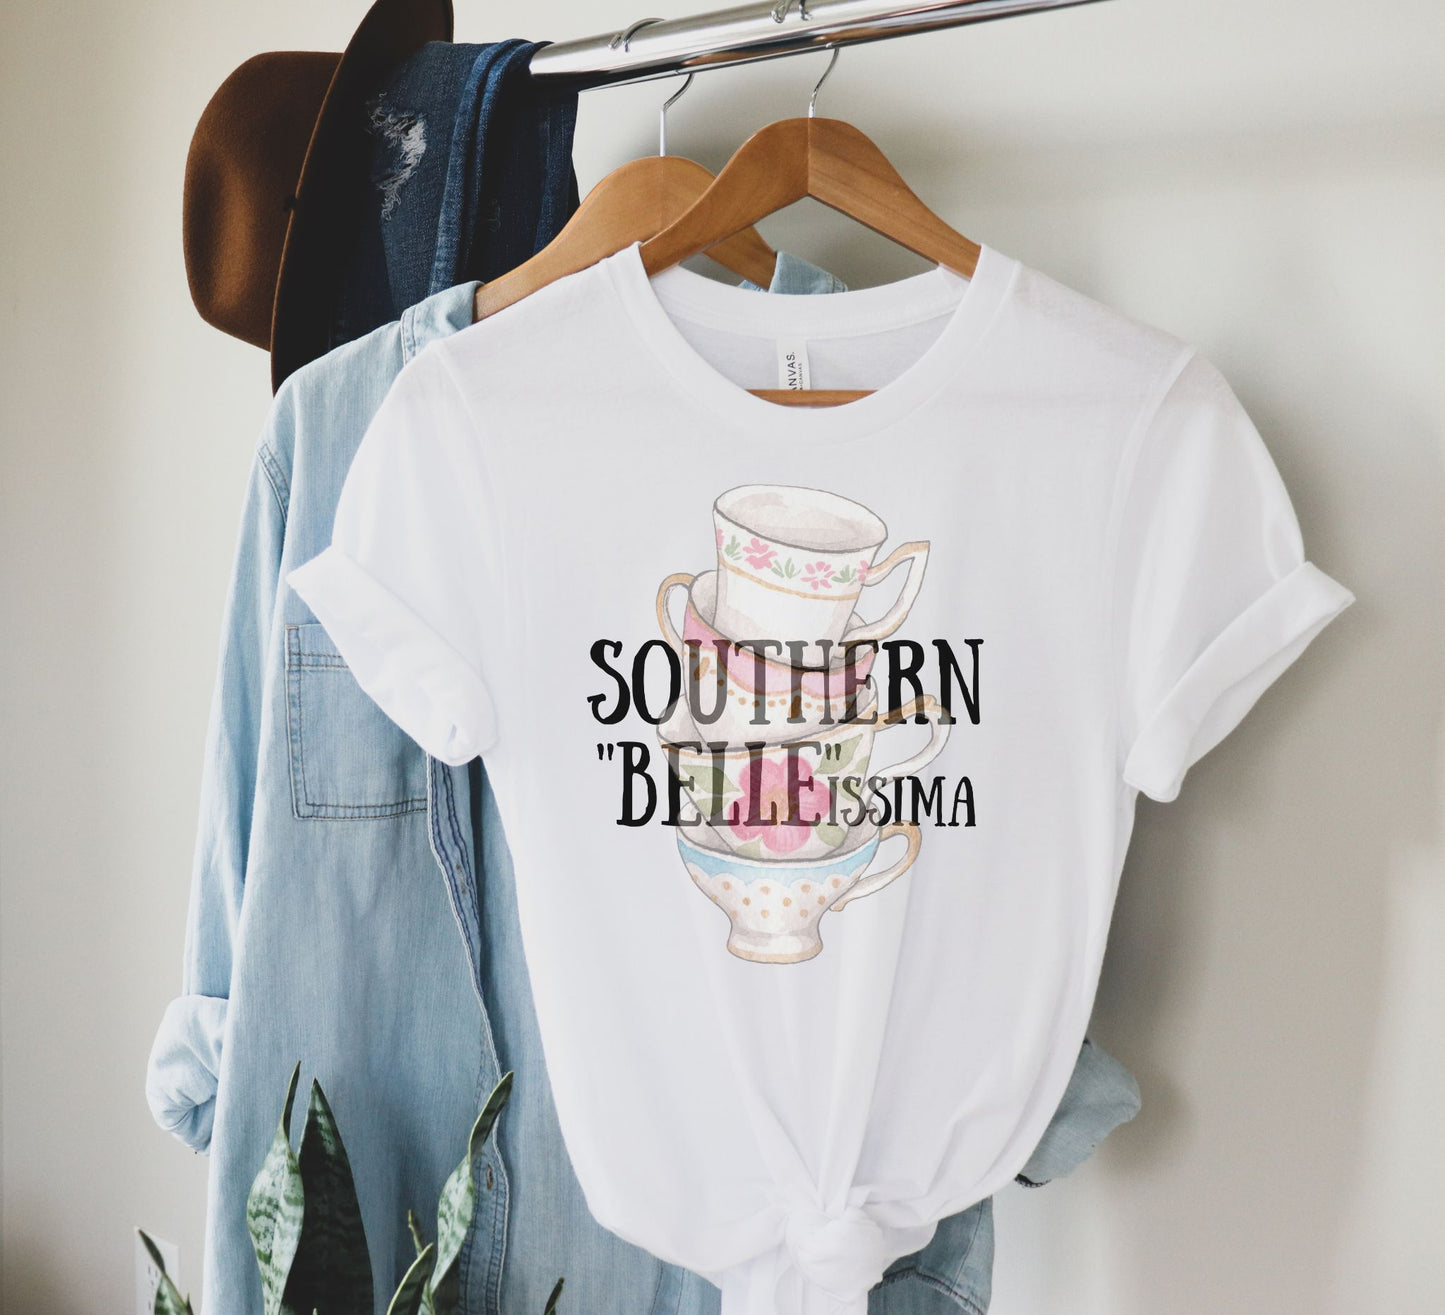 Southern "Belle"issima T-Shirt - Tea Time